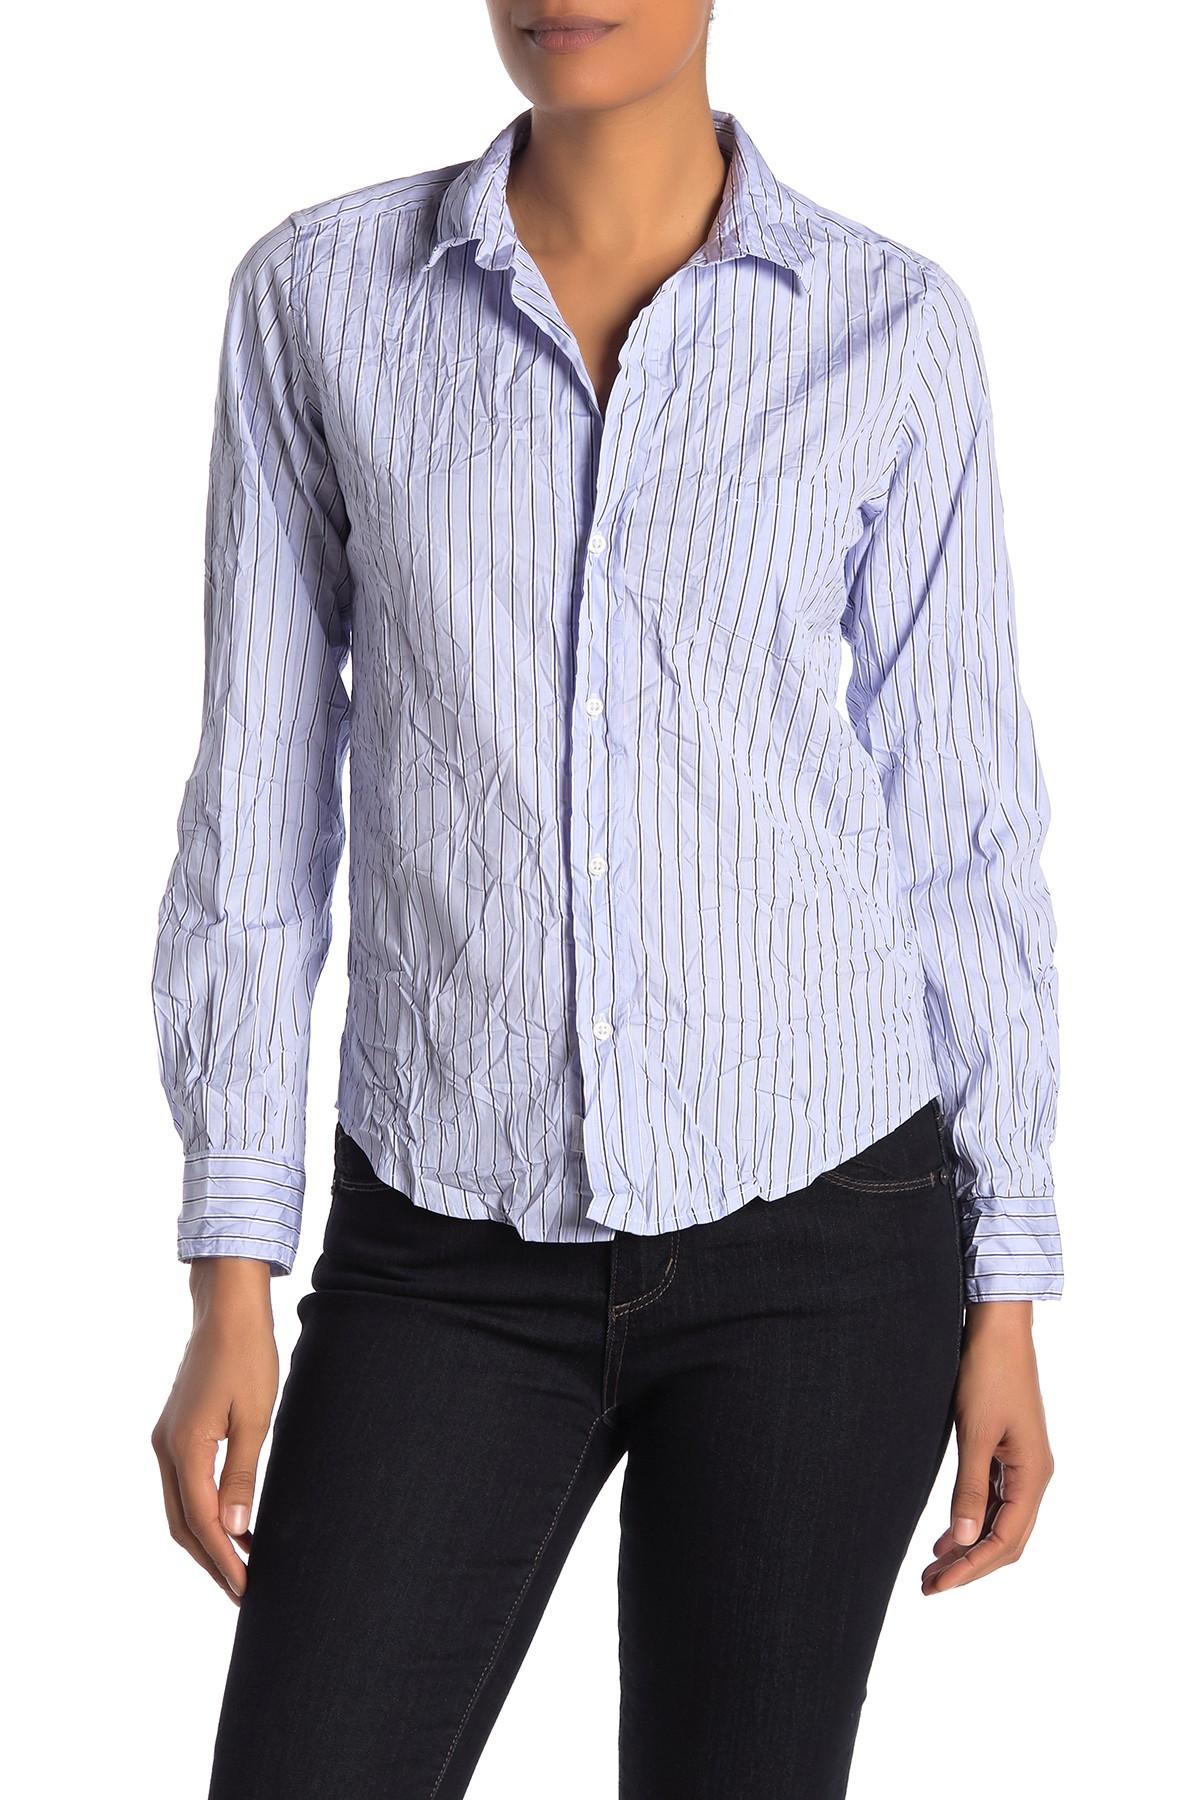 Frank & Eileen Cotton Barry Signature Crinkled Front Button Stripe ...